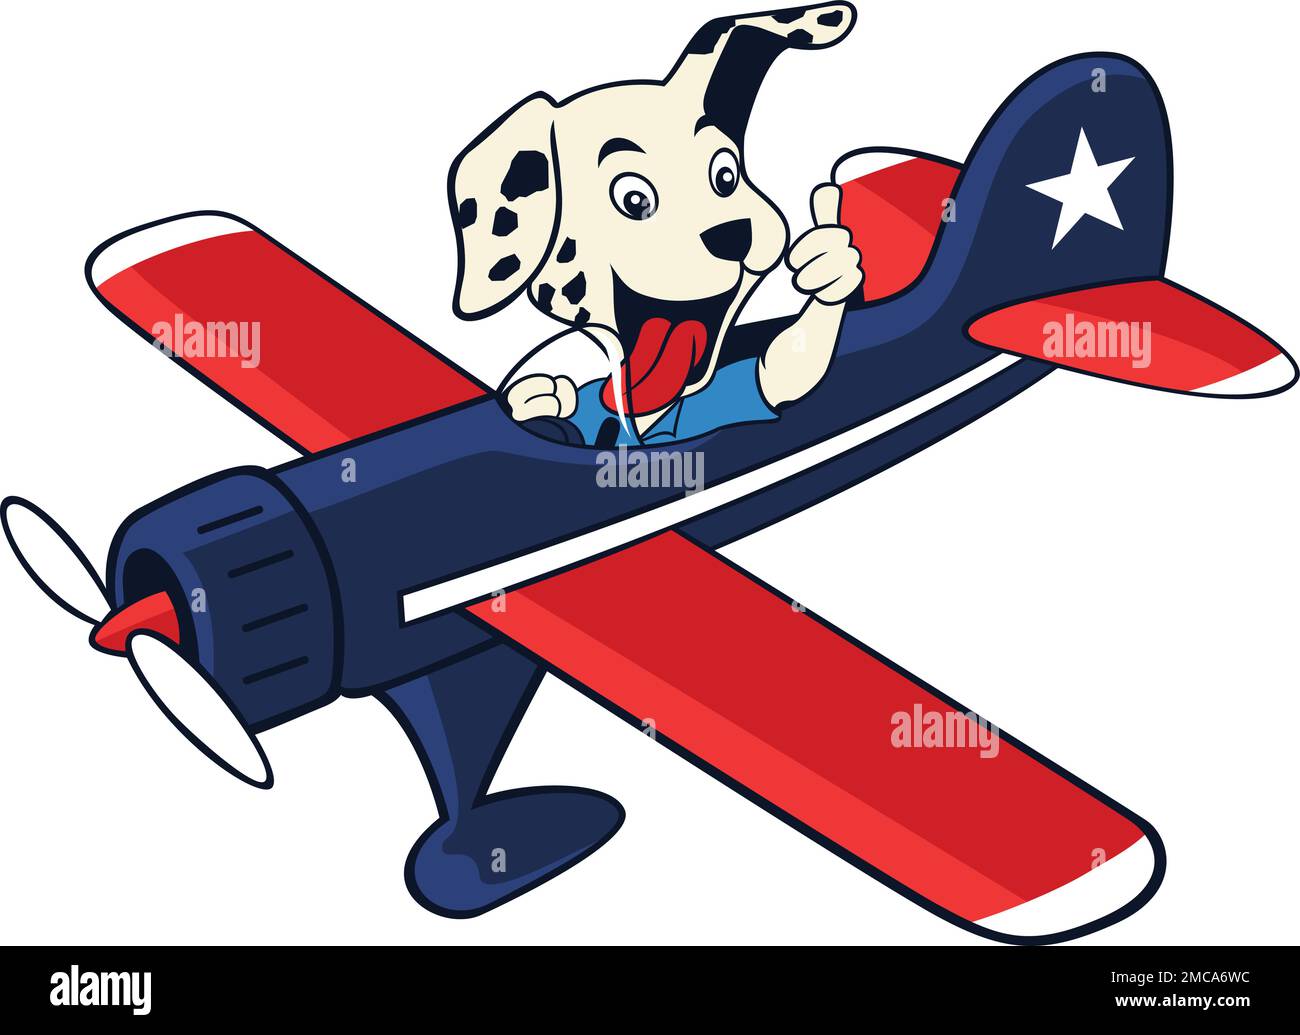 Playful Dog Flying a Plane Stock Vector